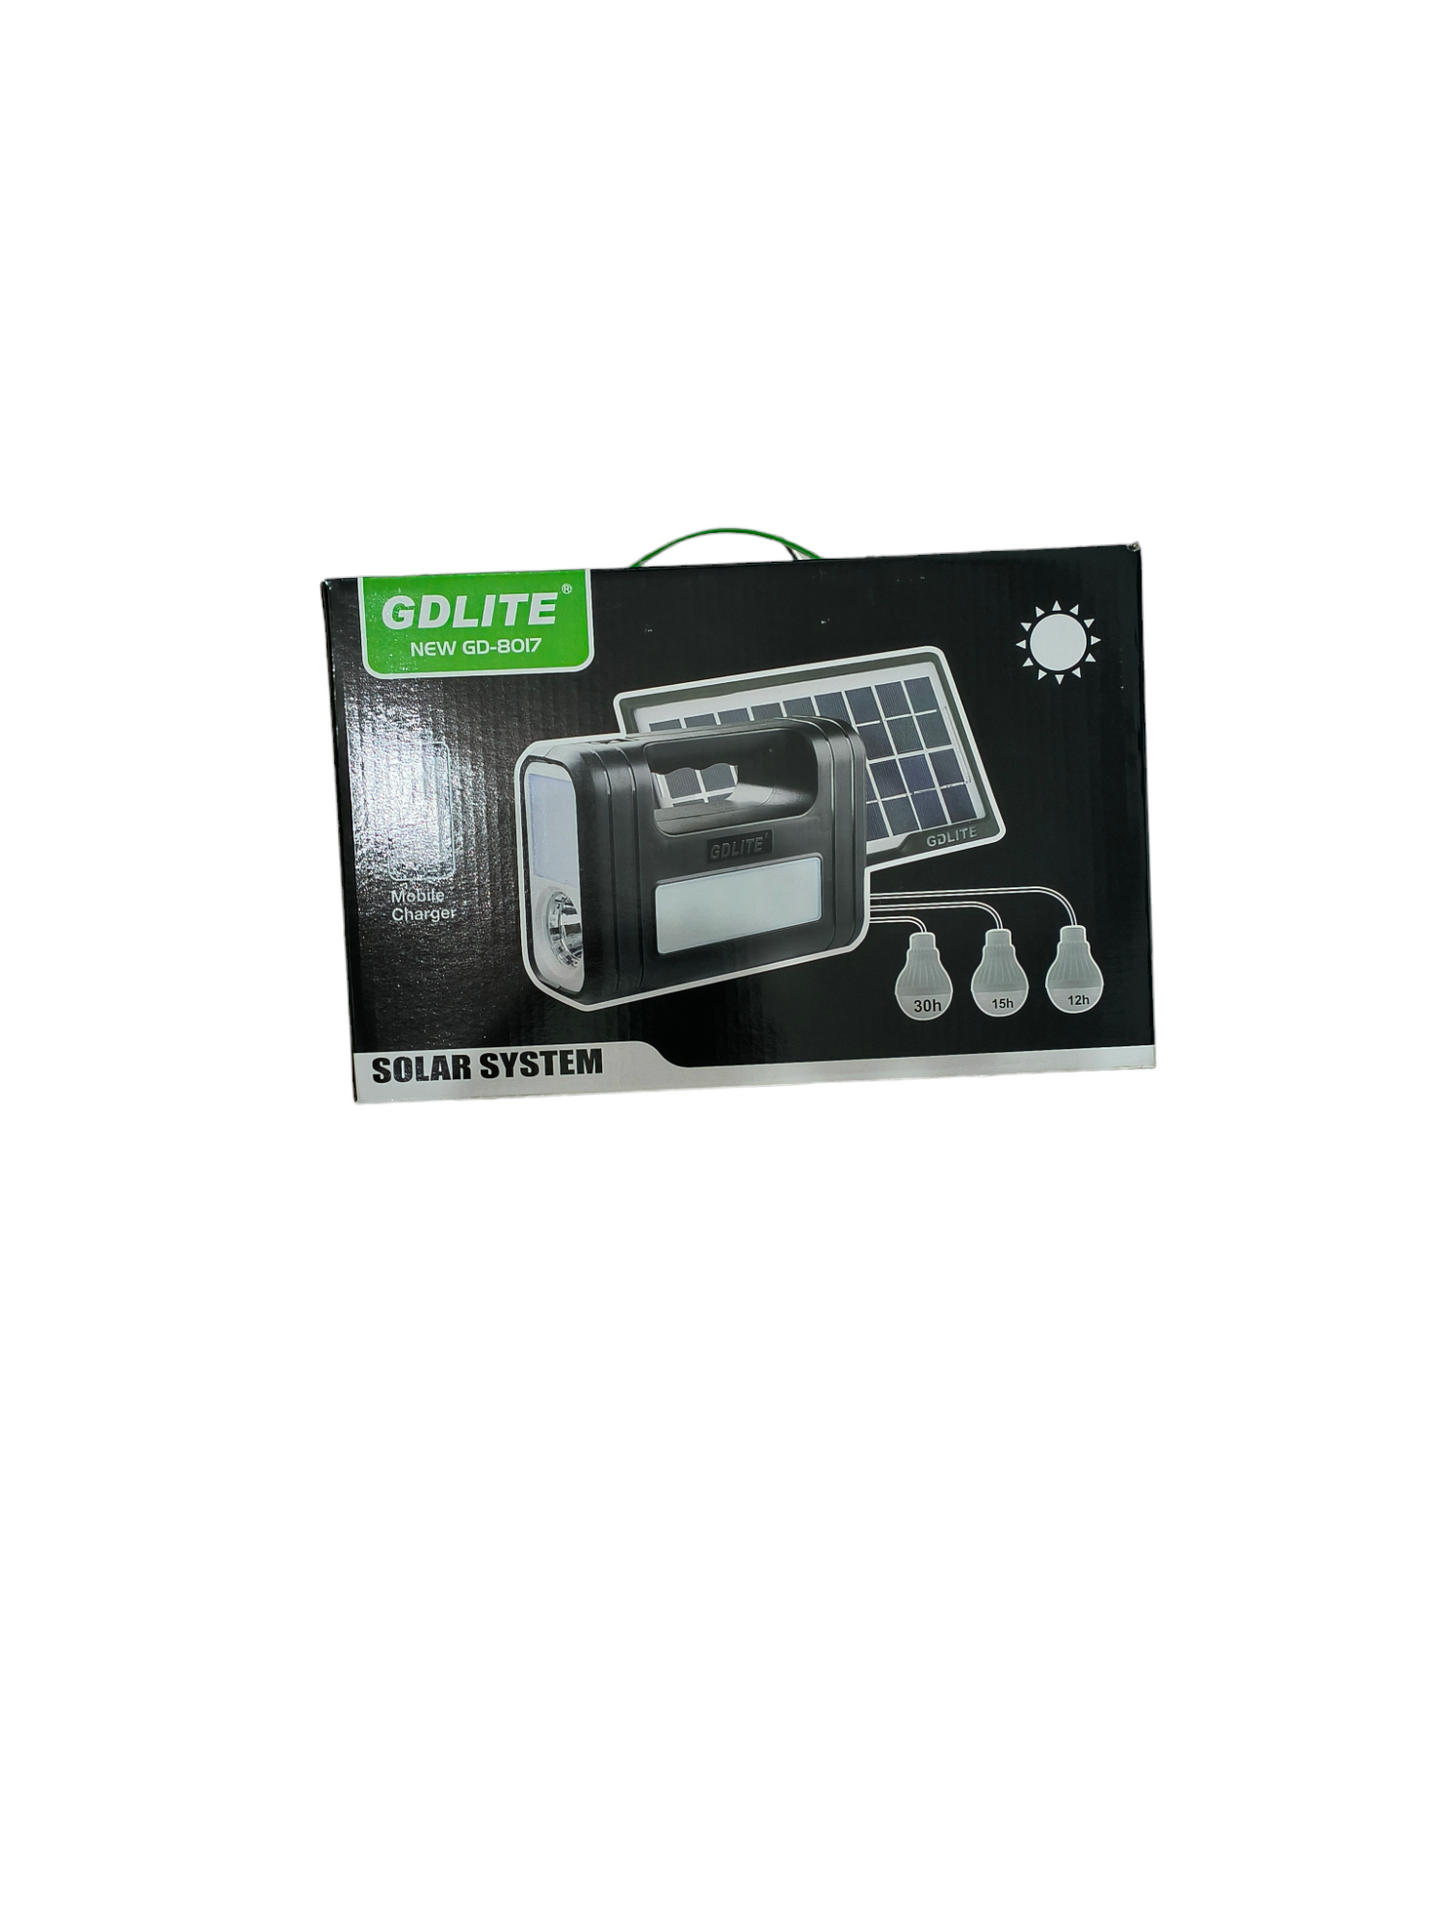 Complete GDlite Portable Solar Charged Light System